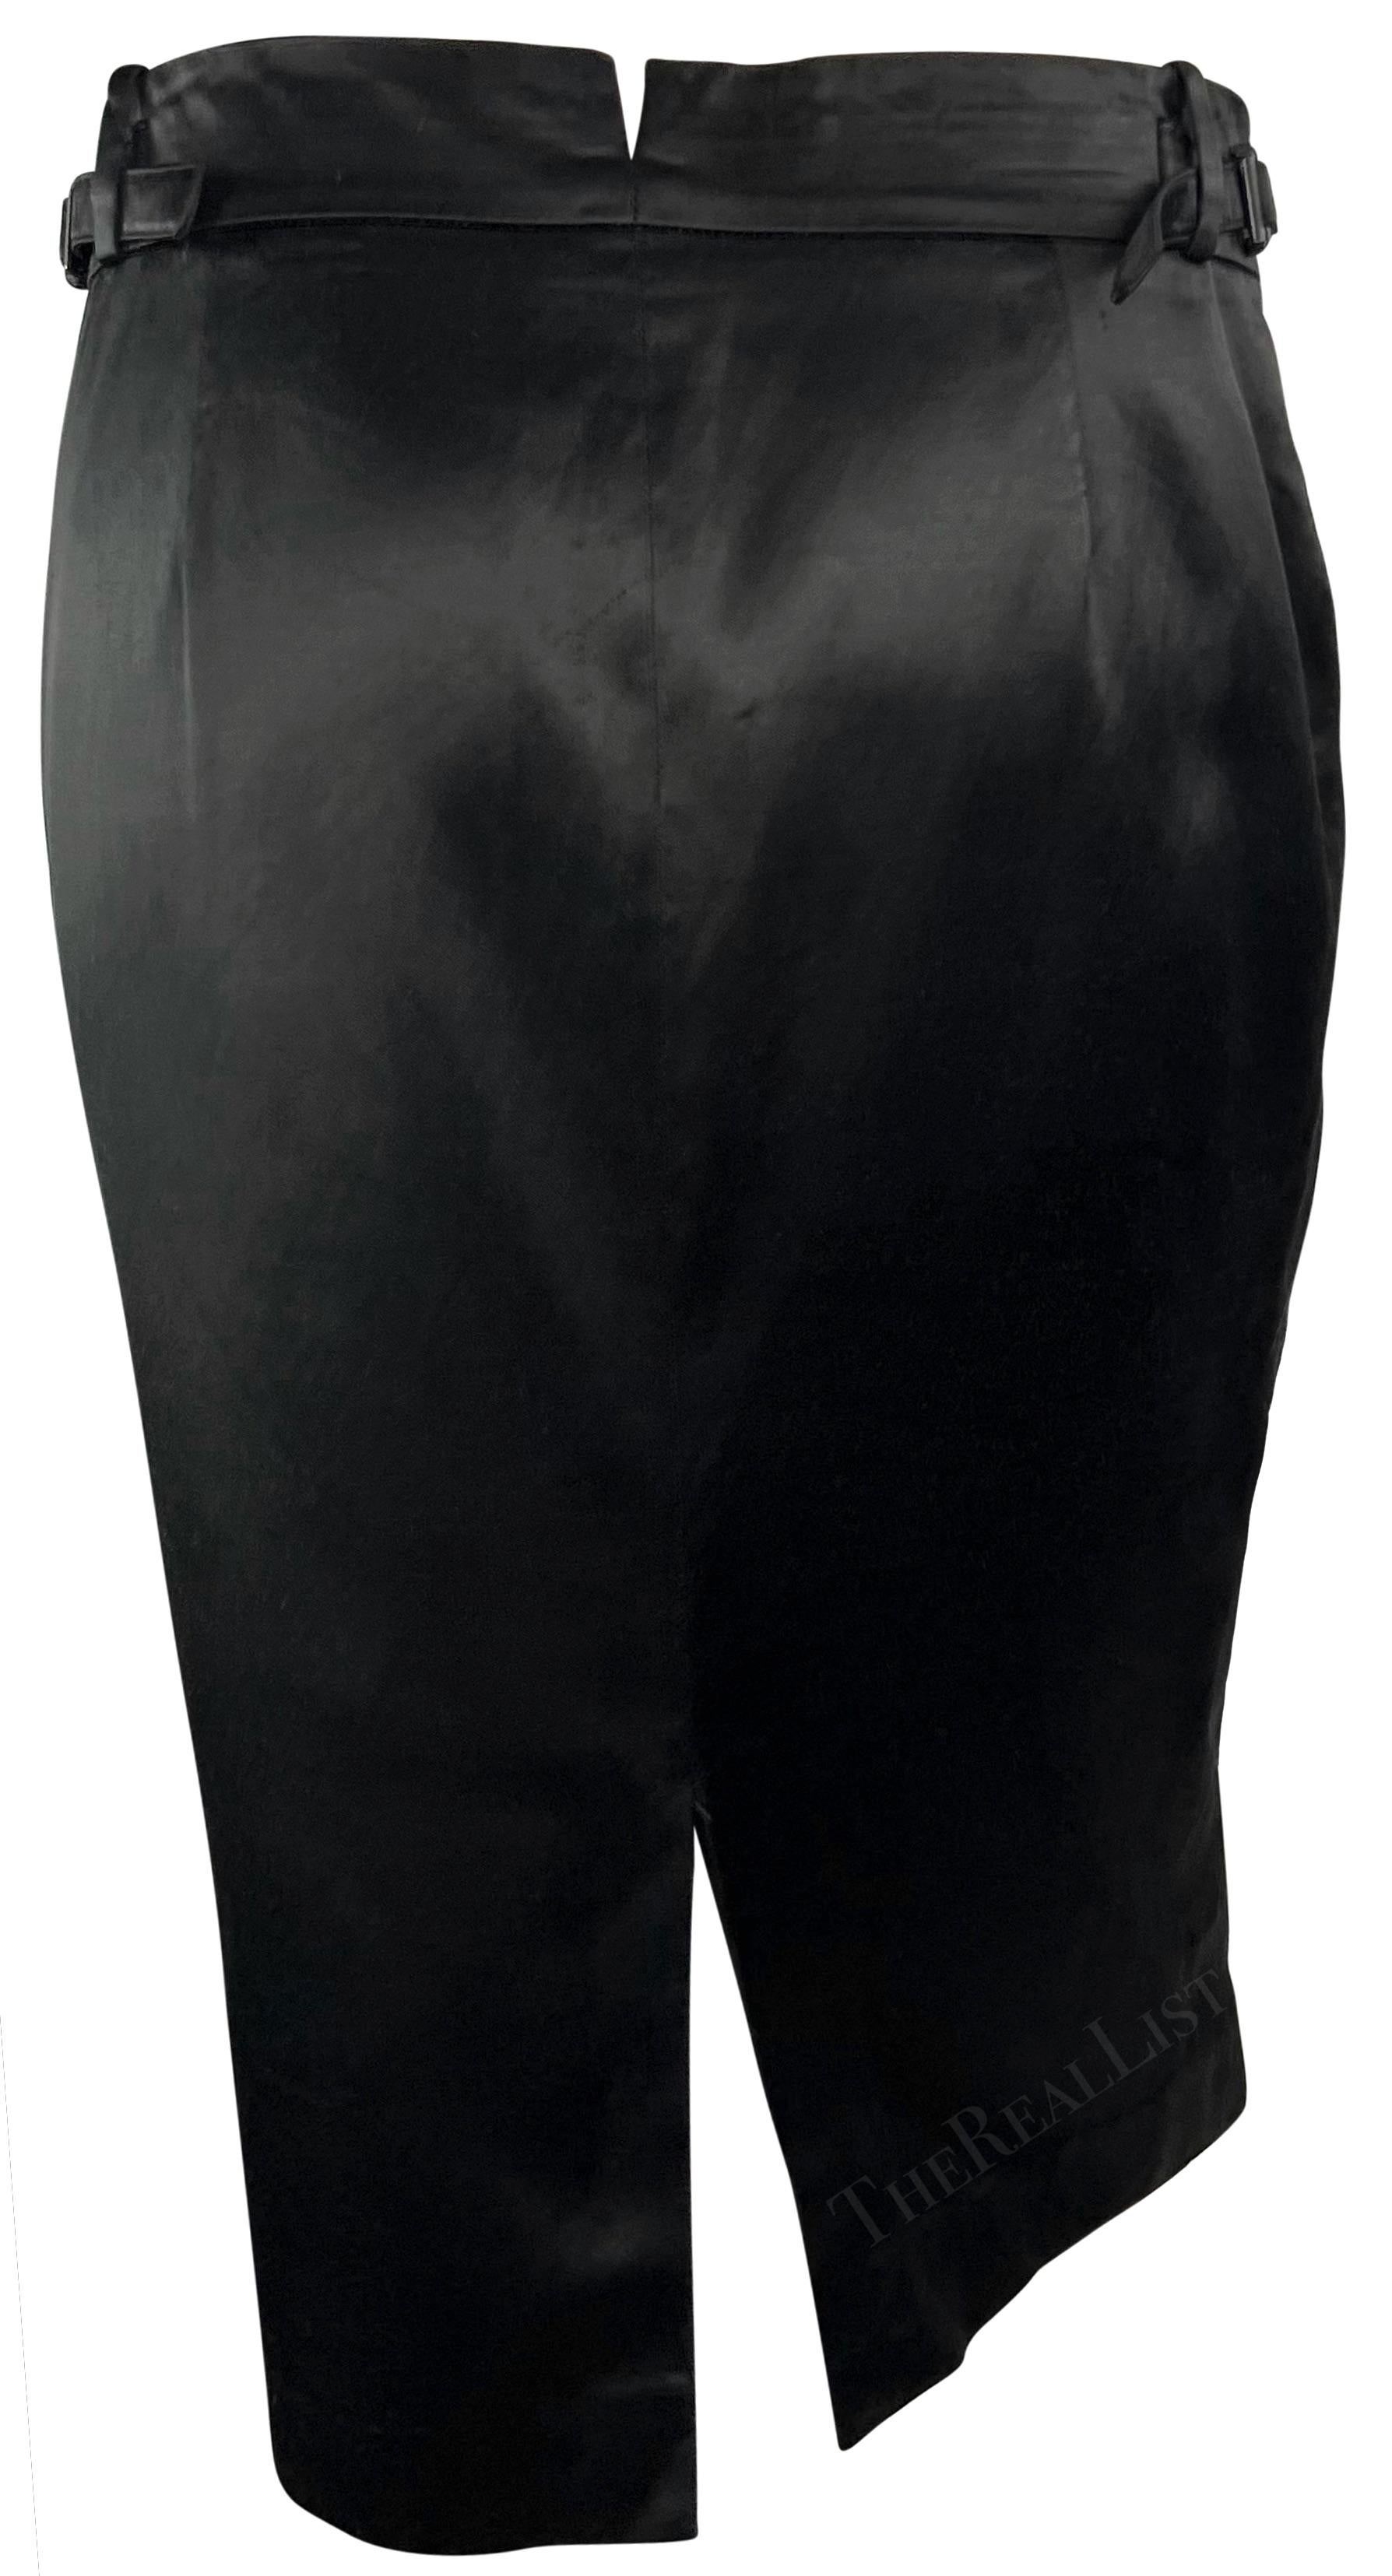 S/S 2001 Gucci by Tom Ford Black Satin Belted Runway Pencil Skirt  For Sale 1